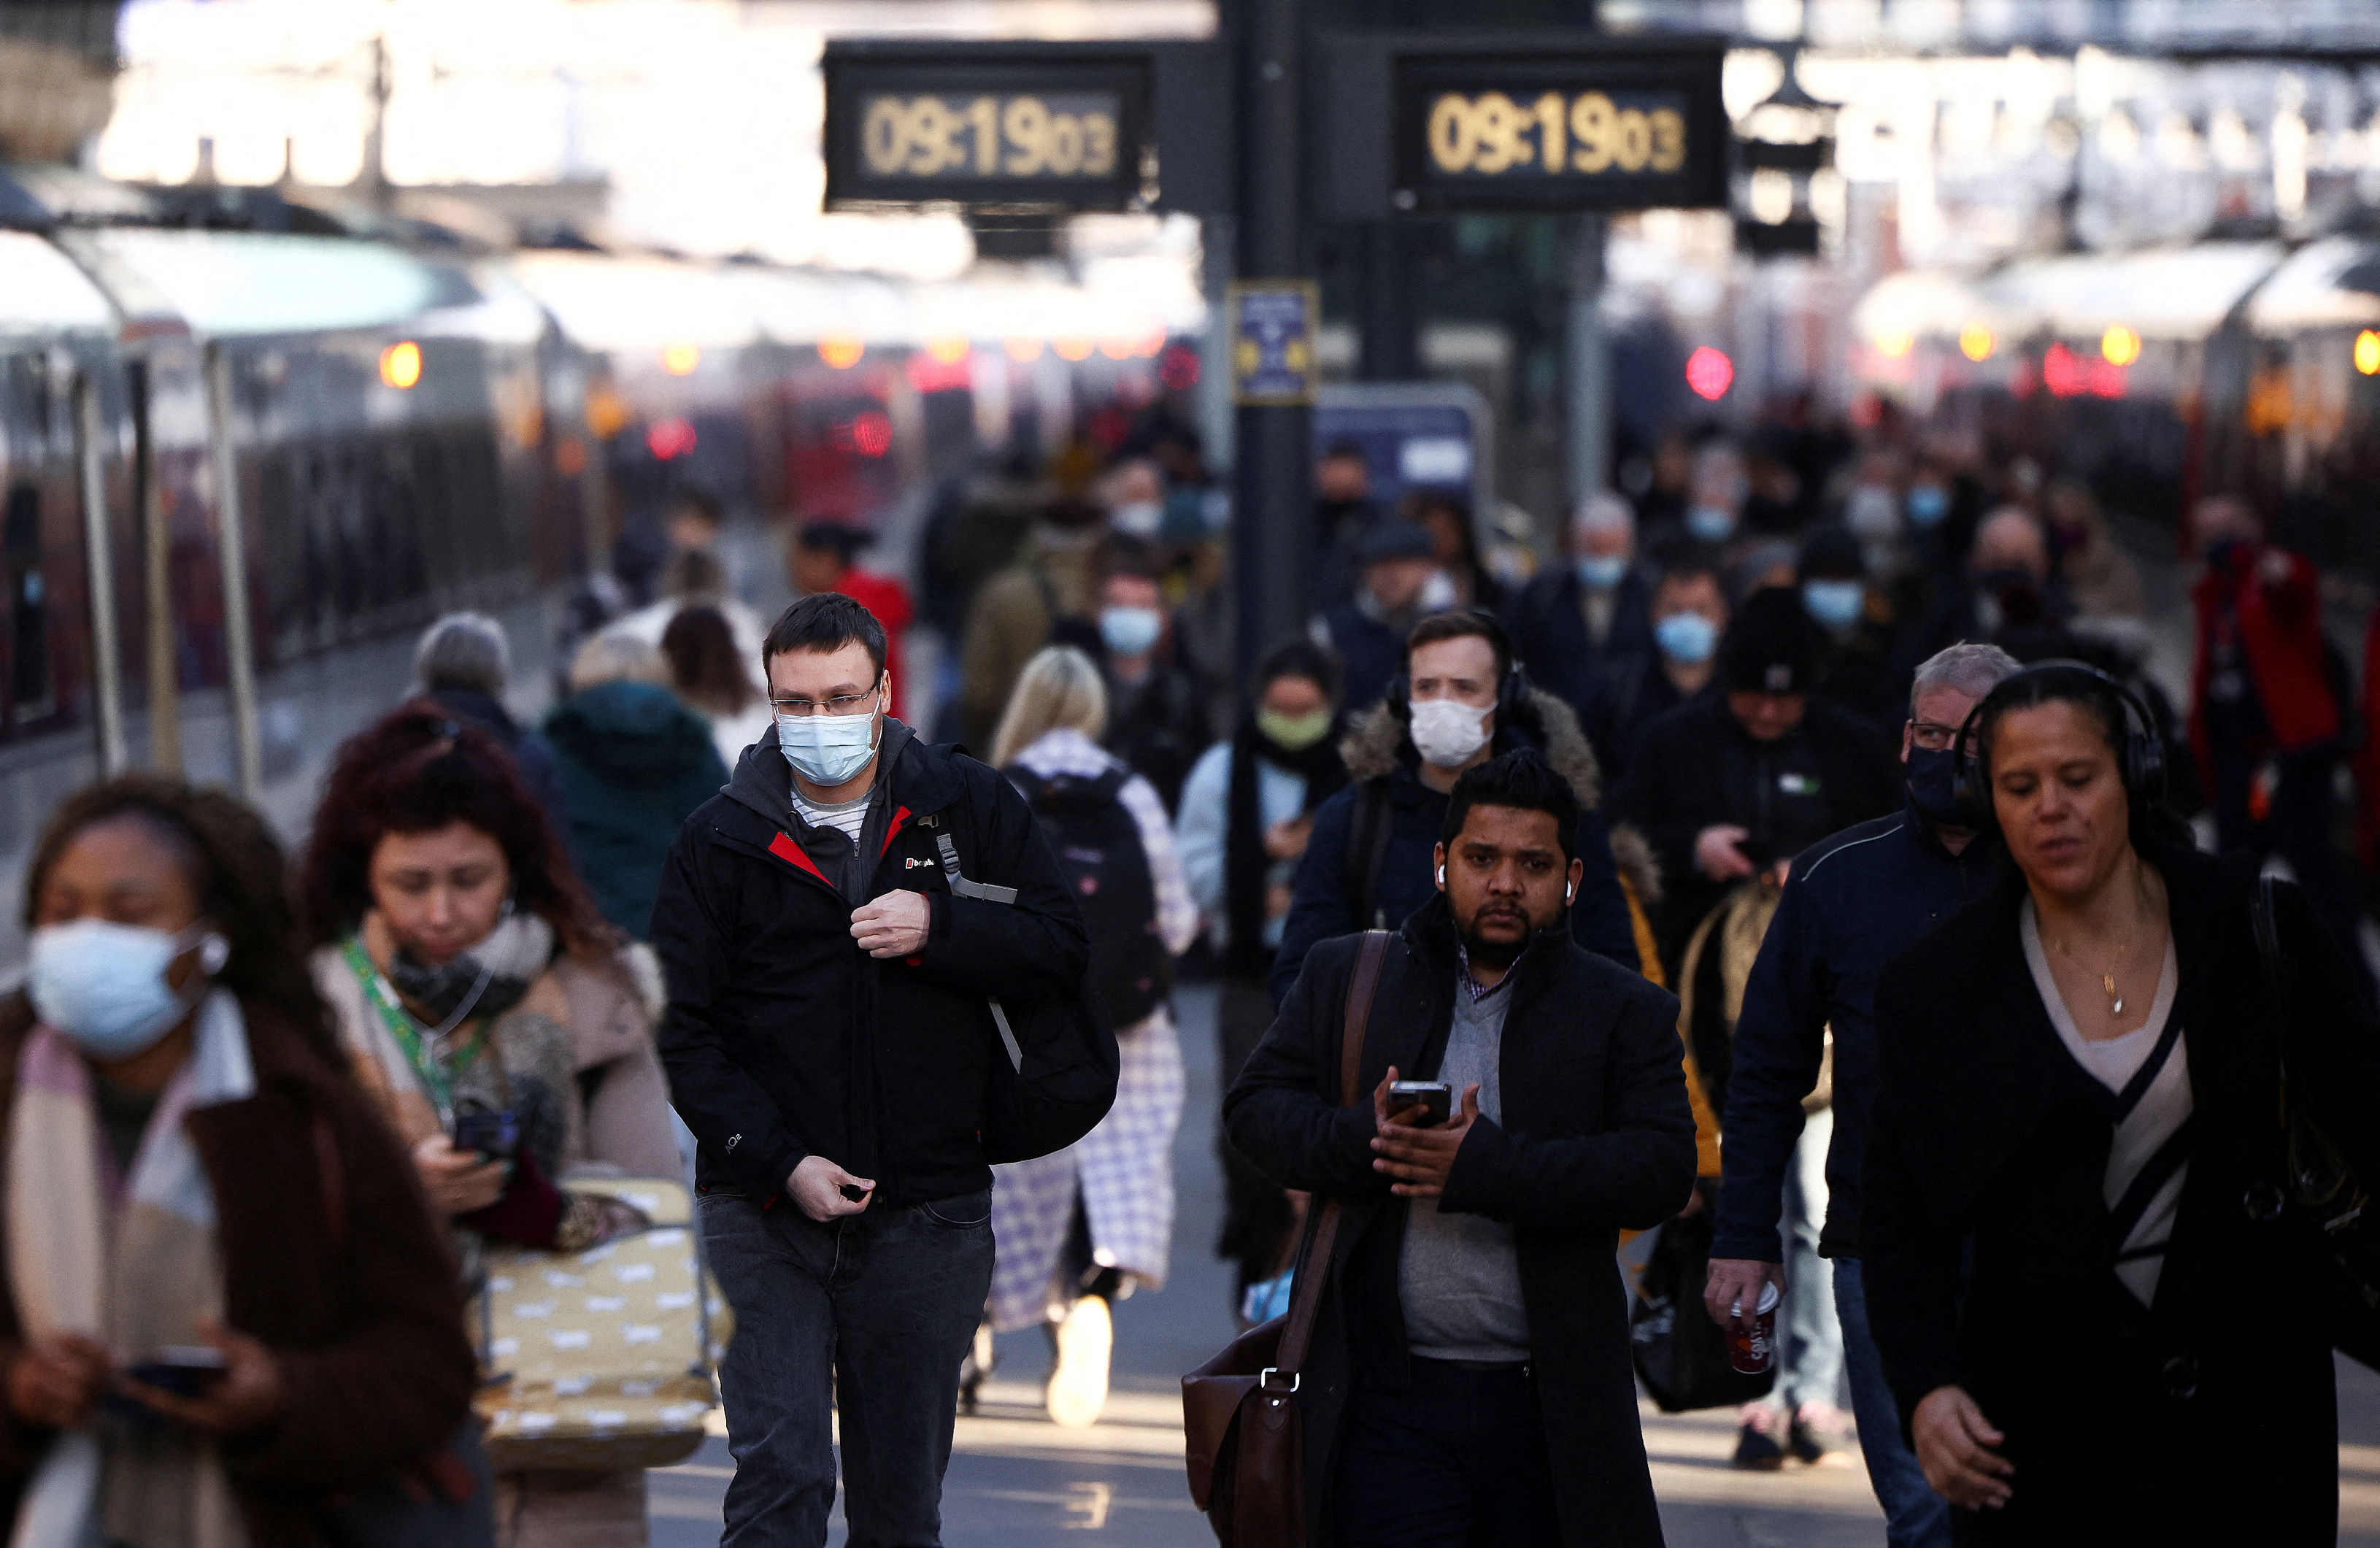 People walk at King's Cross train station, amid the ongoing coronavirus disease (COVID-19) pandemic, in London